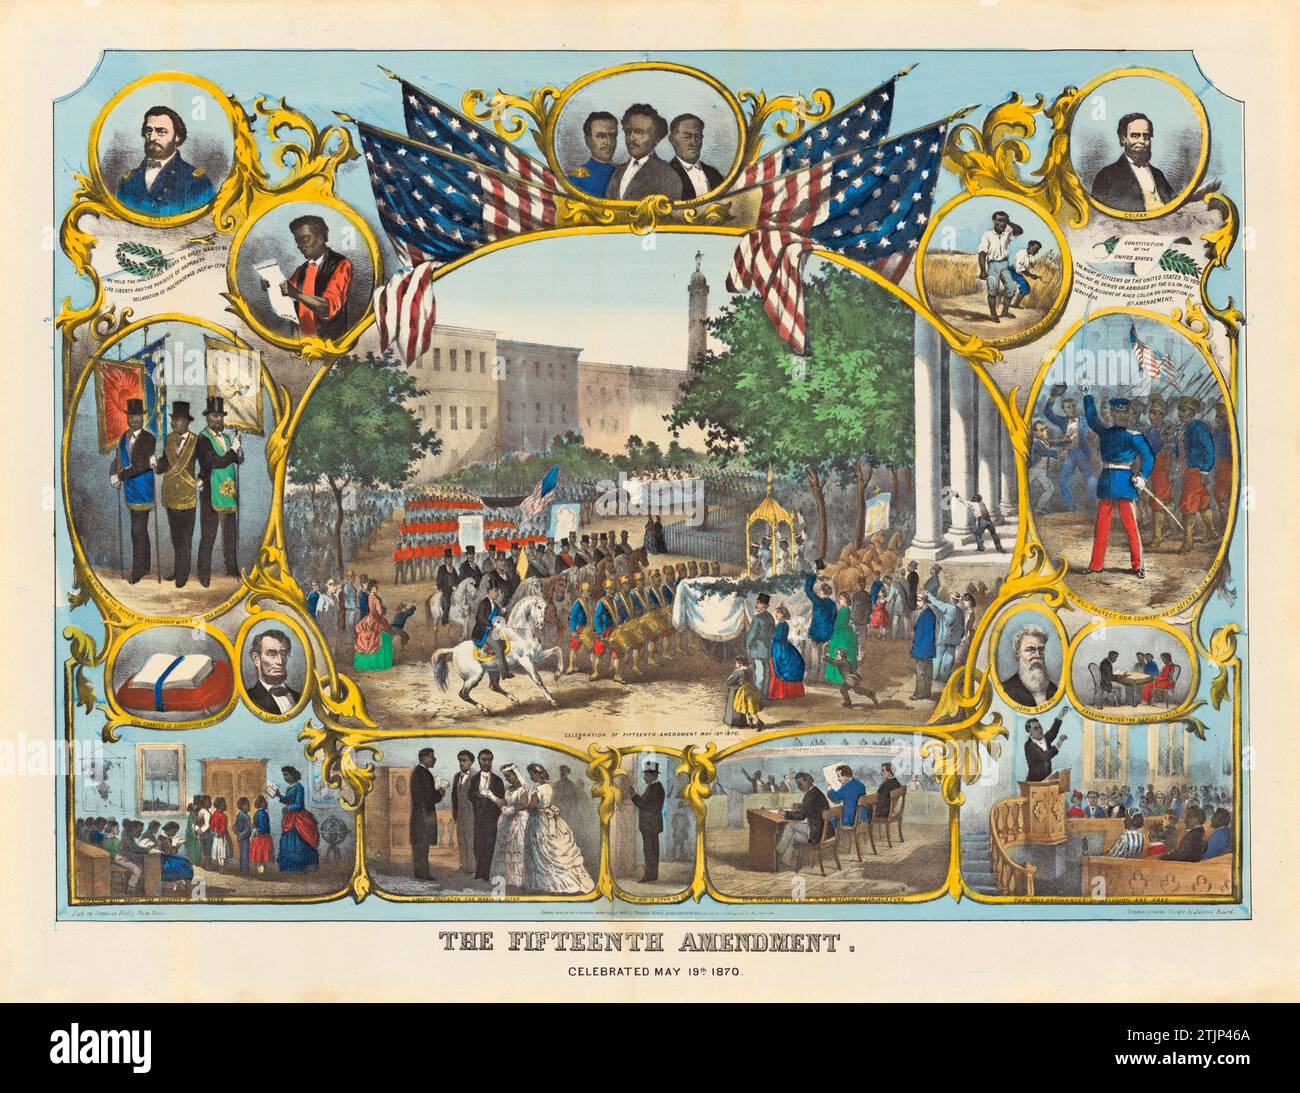 Illustration depicting the Fifteenth Amendment by an unknown artist after James Carter Beard 1837 – 1913. Lithographer Thomas Kelly.Sitter Ulysses Simpson Grant;Martin Robison Delany;Frederick Douglass;Hiram Rhoades;Schuyler Colfax John;Abraham Lincoln. This print features a festive parade held in Baltimore, May 1870, to celebrate the ratification of the 15th Amendment to the Constitution (1870), which granted the right to vote to male citizens regardless of “race, colour, or previous servitude”  An optimised version of an illustration in the National Portrait Gallery, Smithsonian Institution Stock Photo